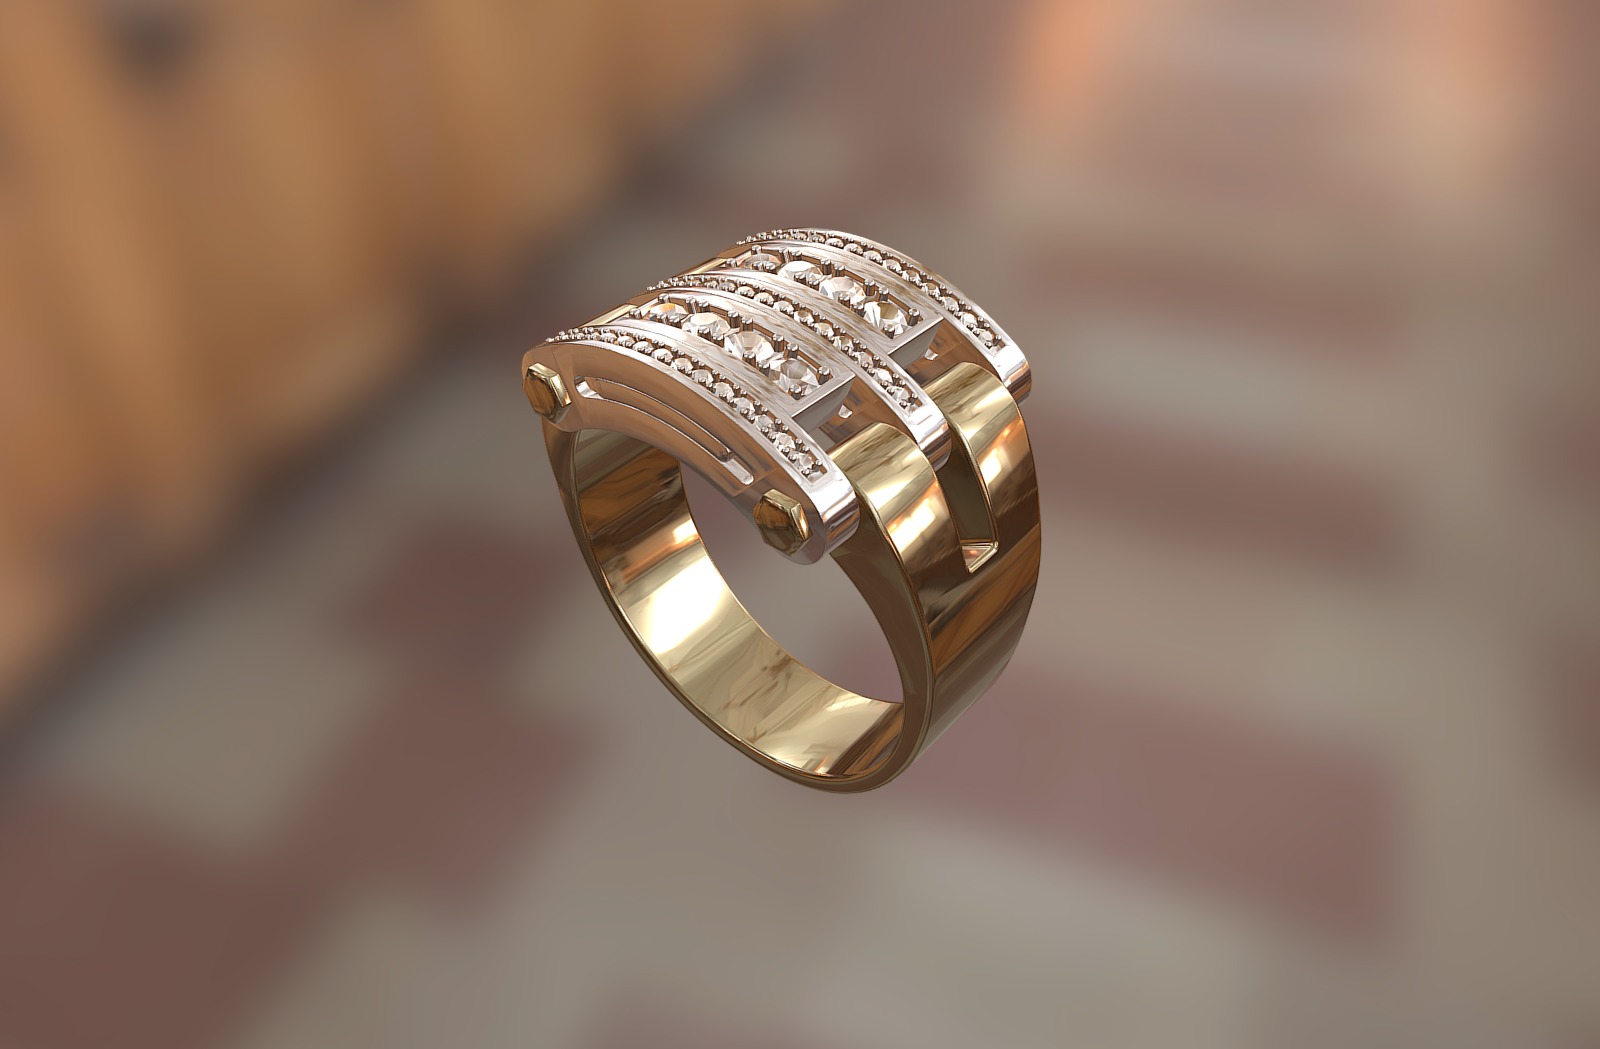 Jewelry - Ring with moving middle parts - 524 - Ring with moving middle parts - 3D model by Lizardsking 3d model